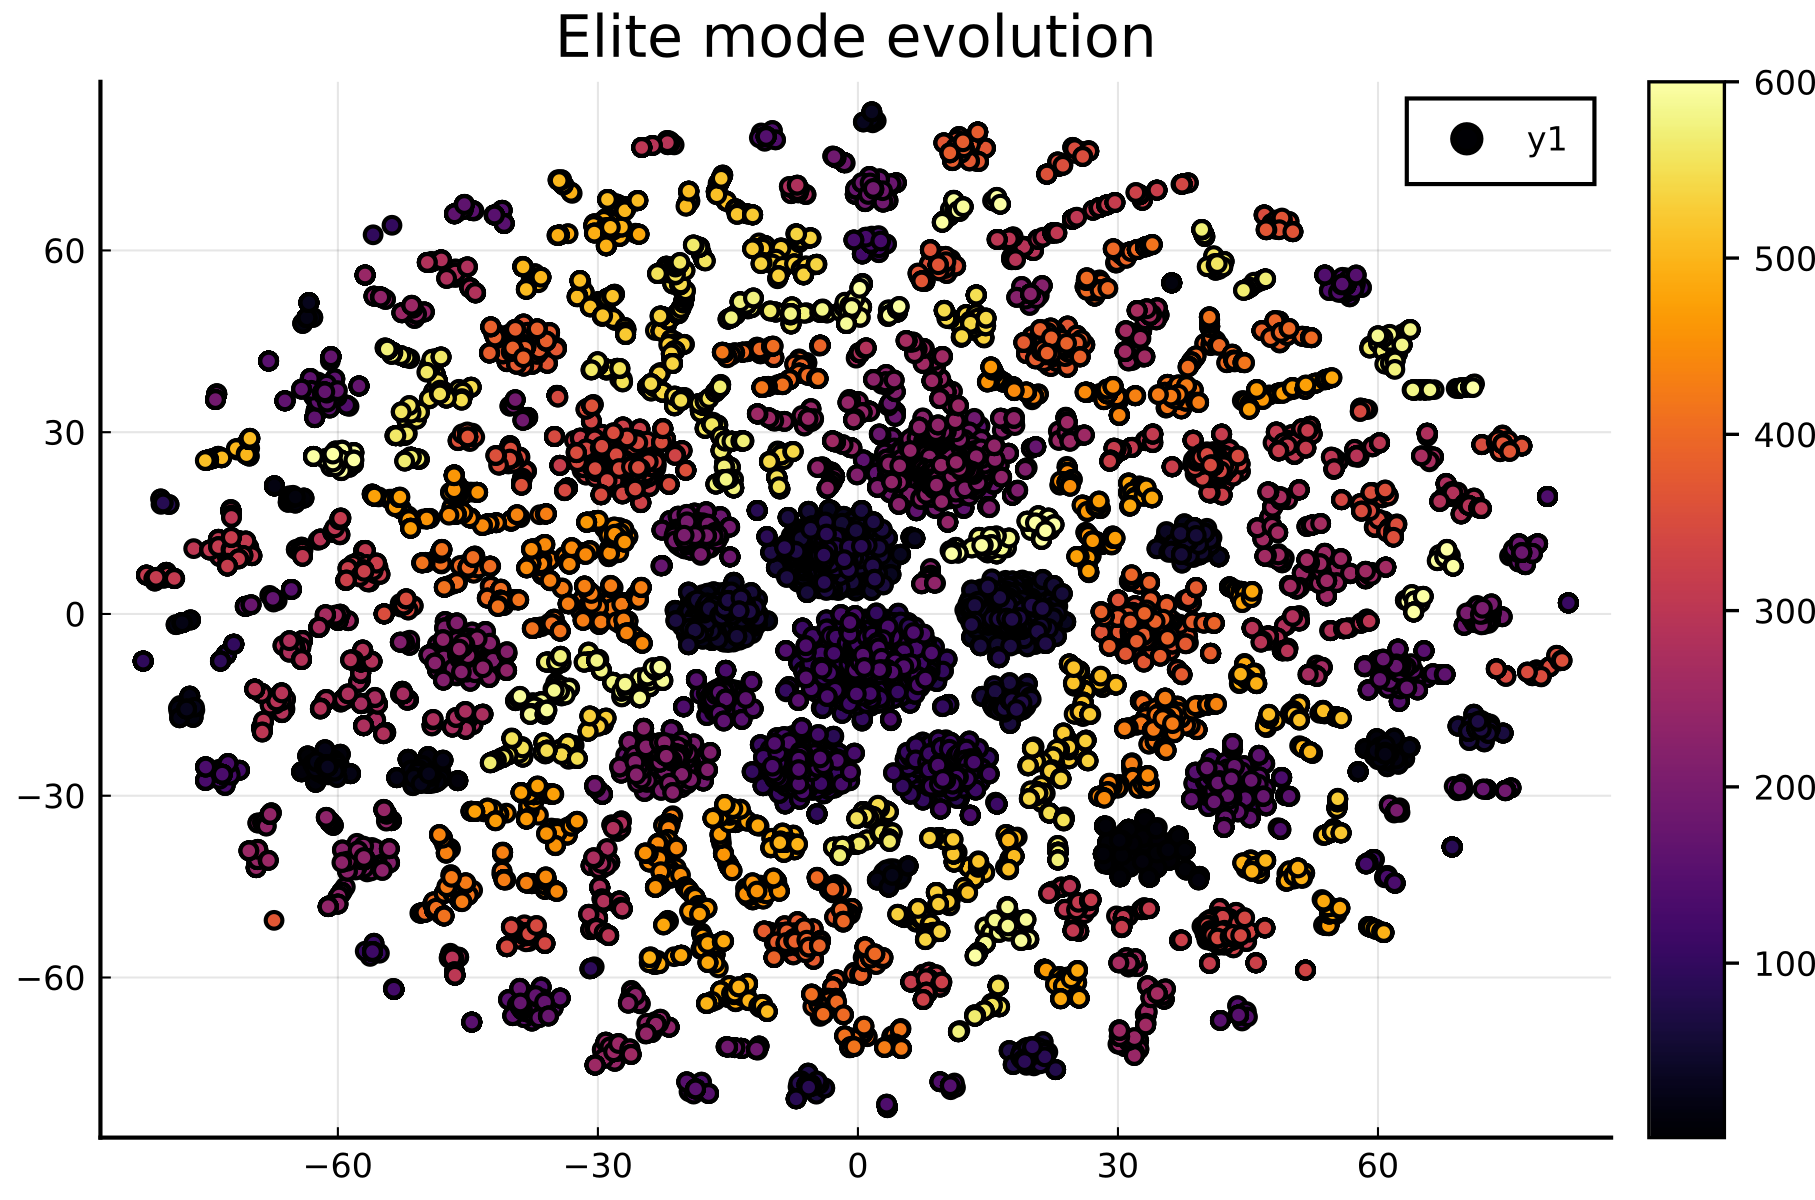 Example evolution of the elite modes in the population during optimization on BipedalWalker-v3. after applying the TSNE algorithm. Each circle is a primitive in the evolving DSL. Color encodes to which generation each primitive belongs.